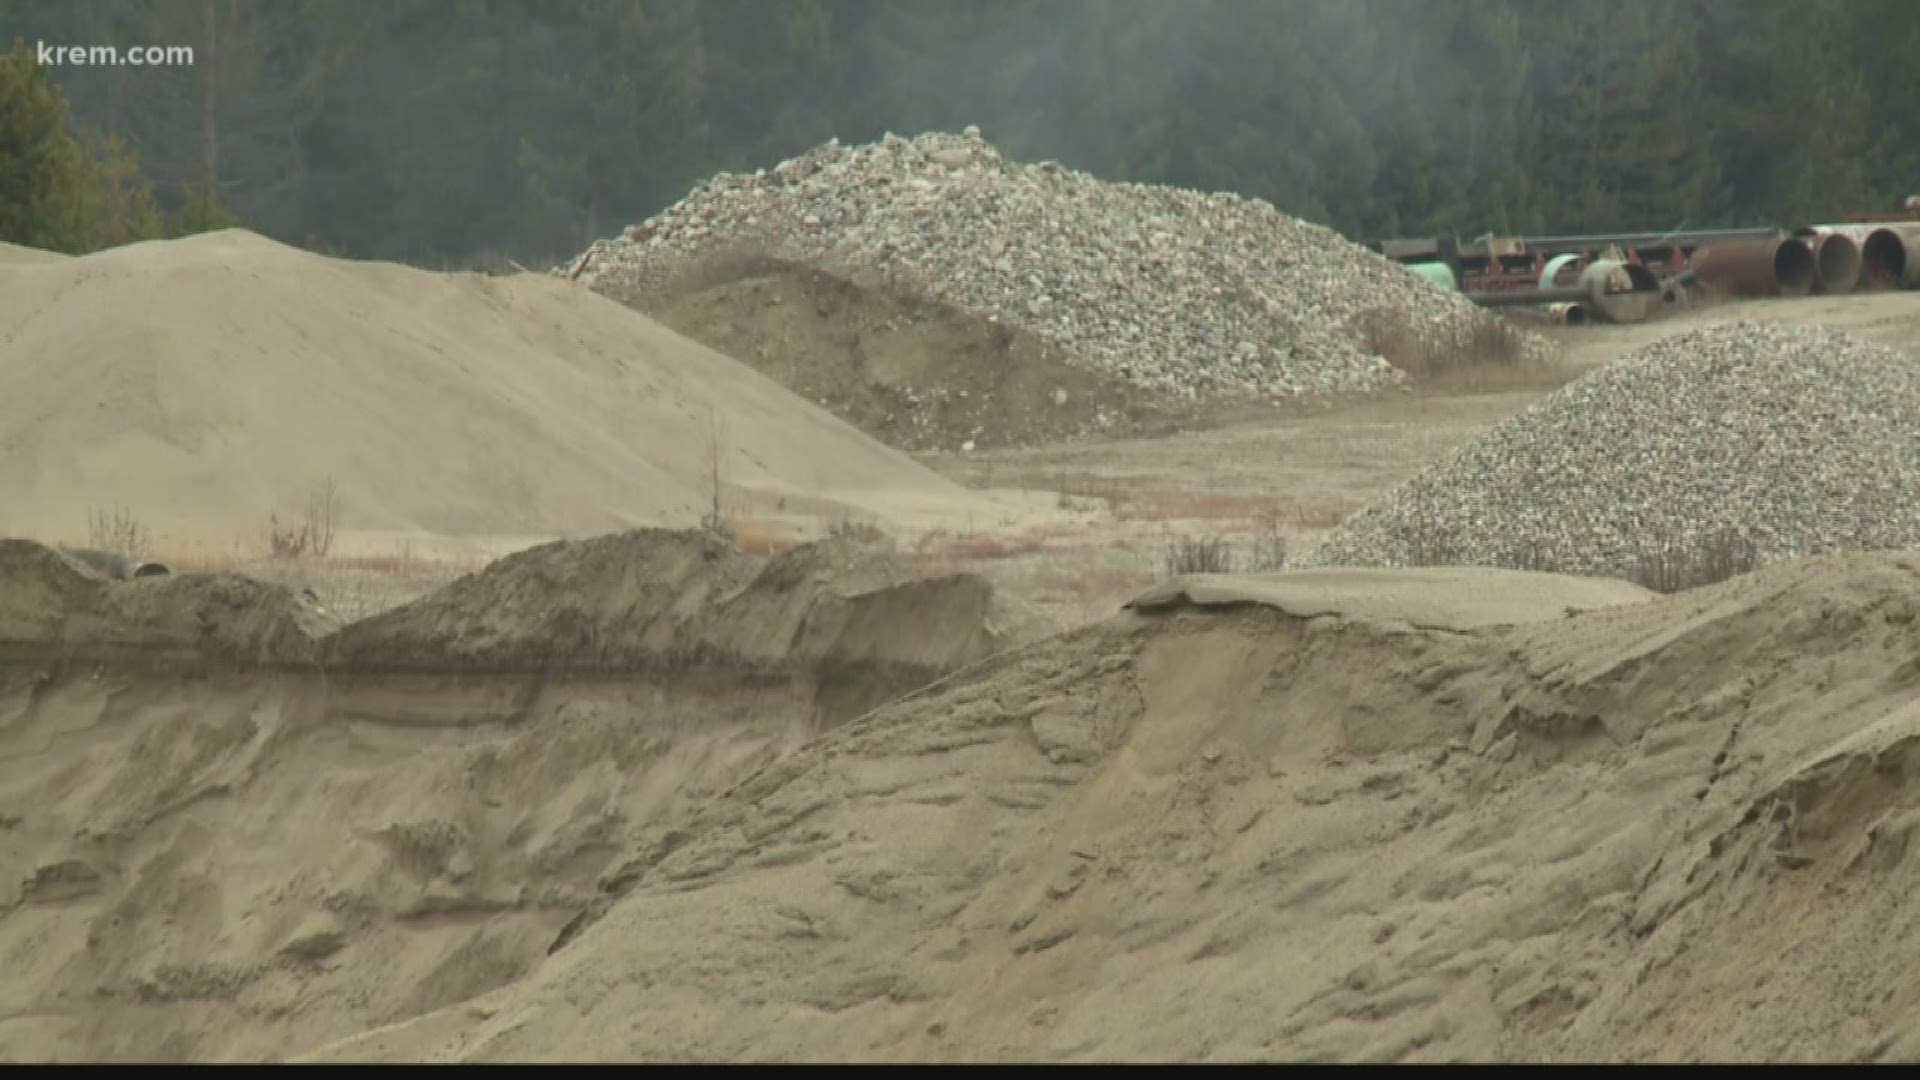 A local company hopes to build the plant at a gravel pit in Sagle. But neighbors are concerned it could affect their health and property values.